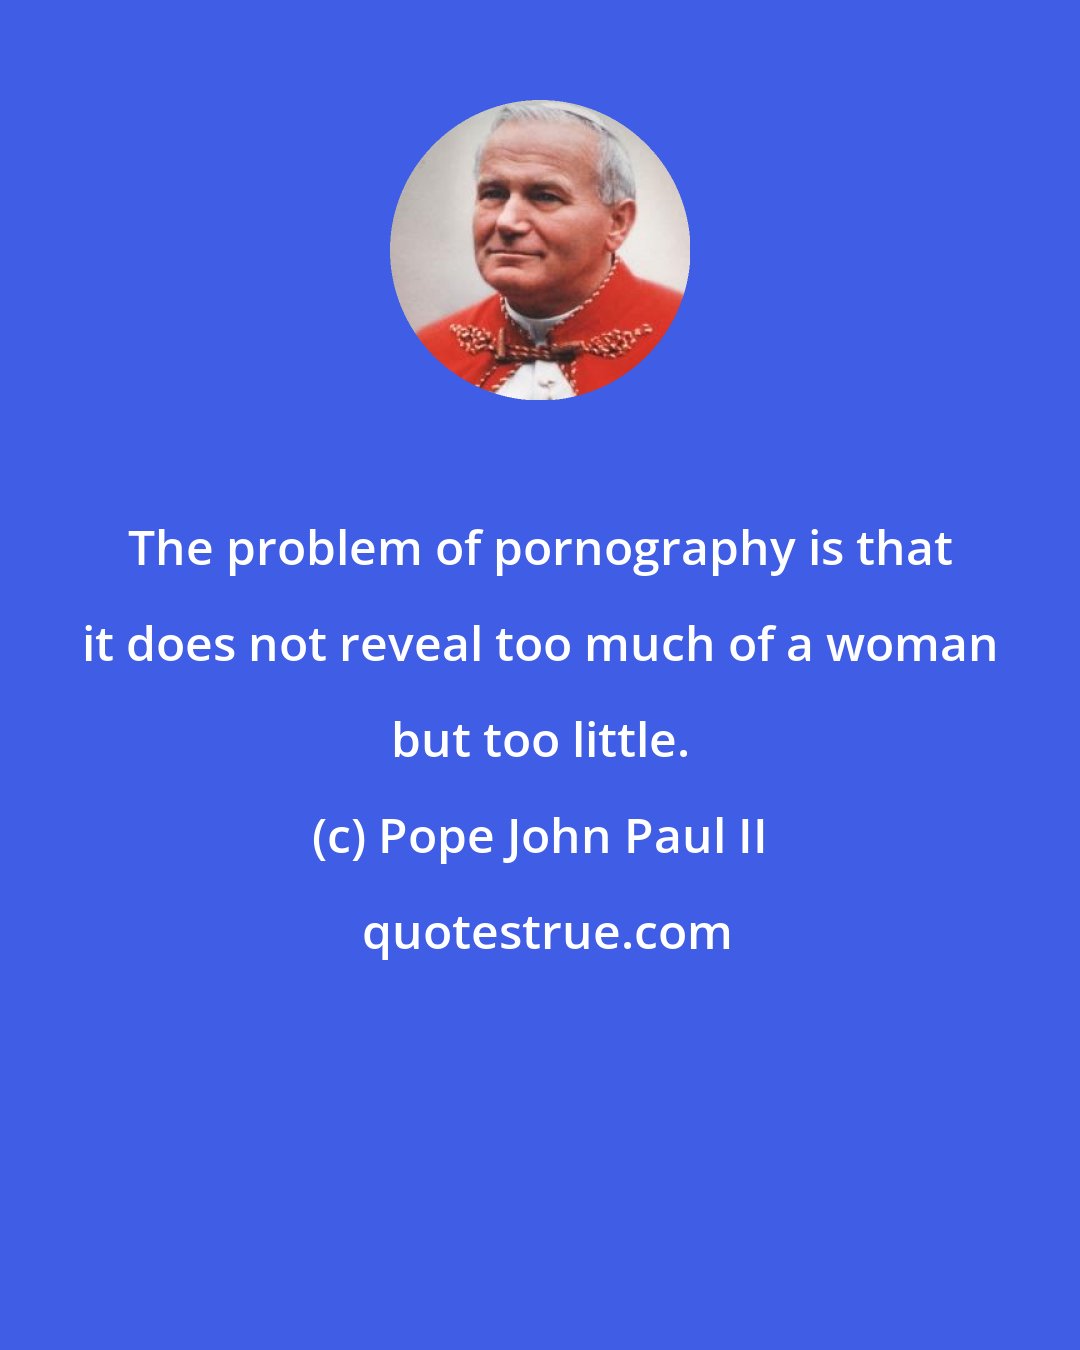 Pope John Paul II: The problem of pornography is that it does not reveal too much of a woman but too little.